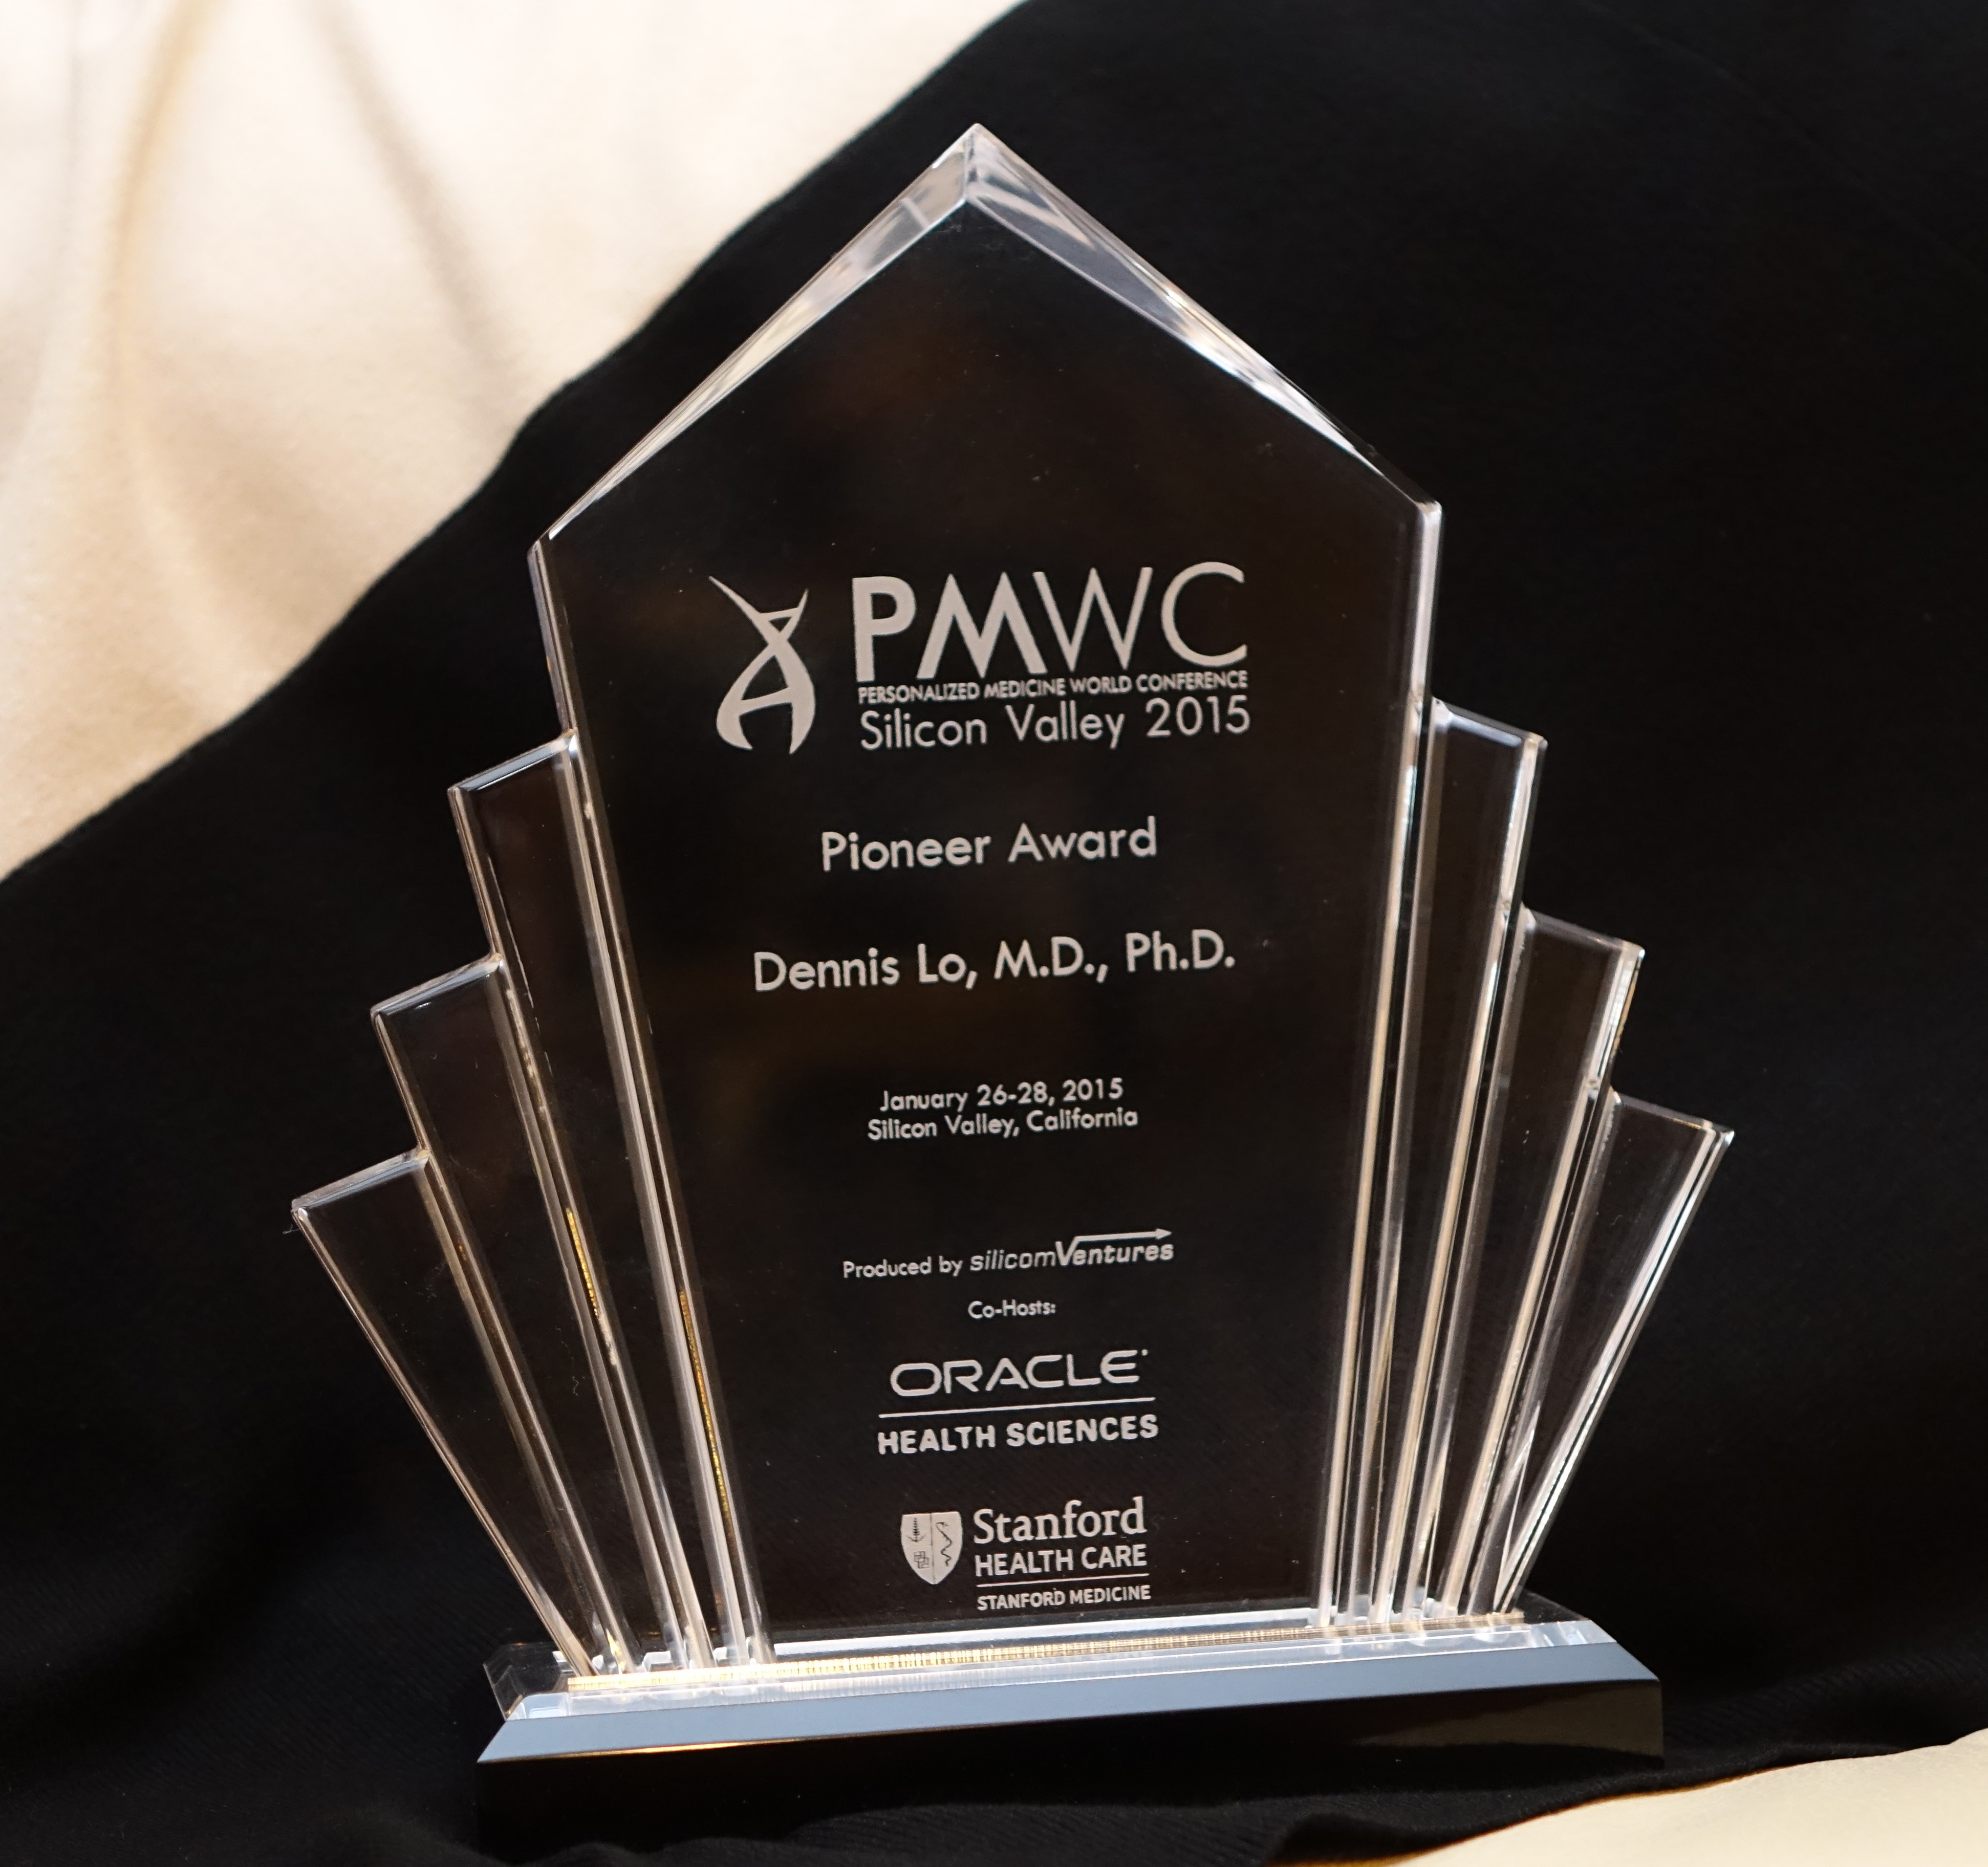 The Pioneer Award of the Personalized Medicine World Conference recognizes researchers